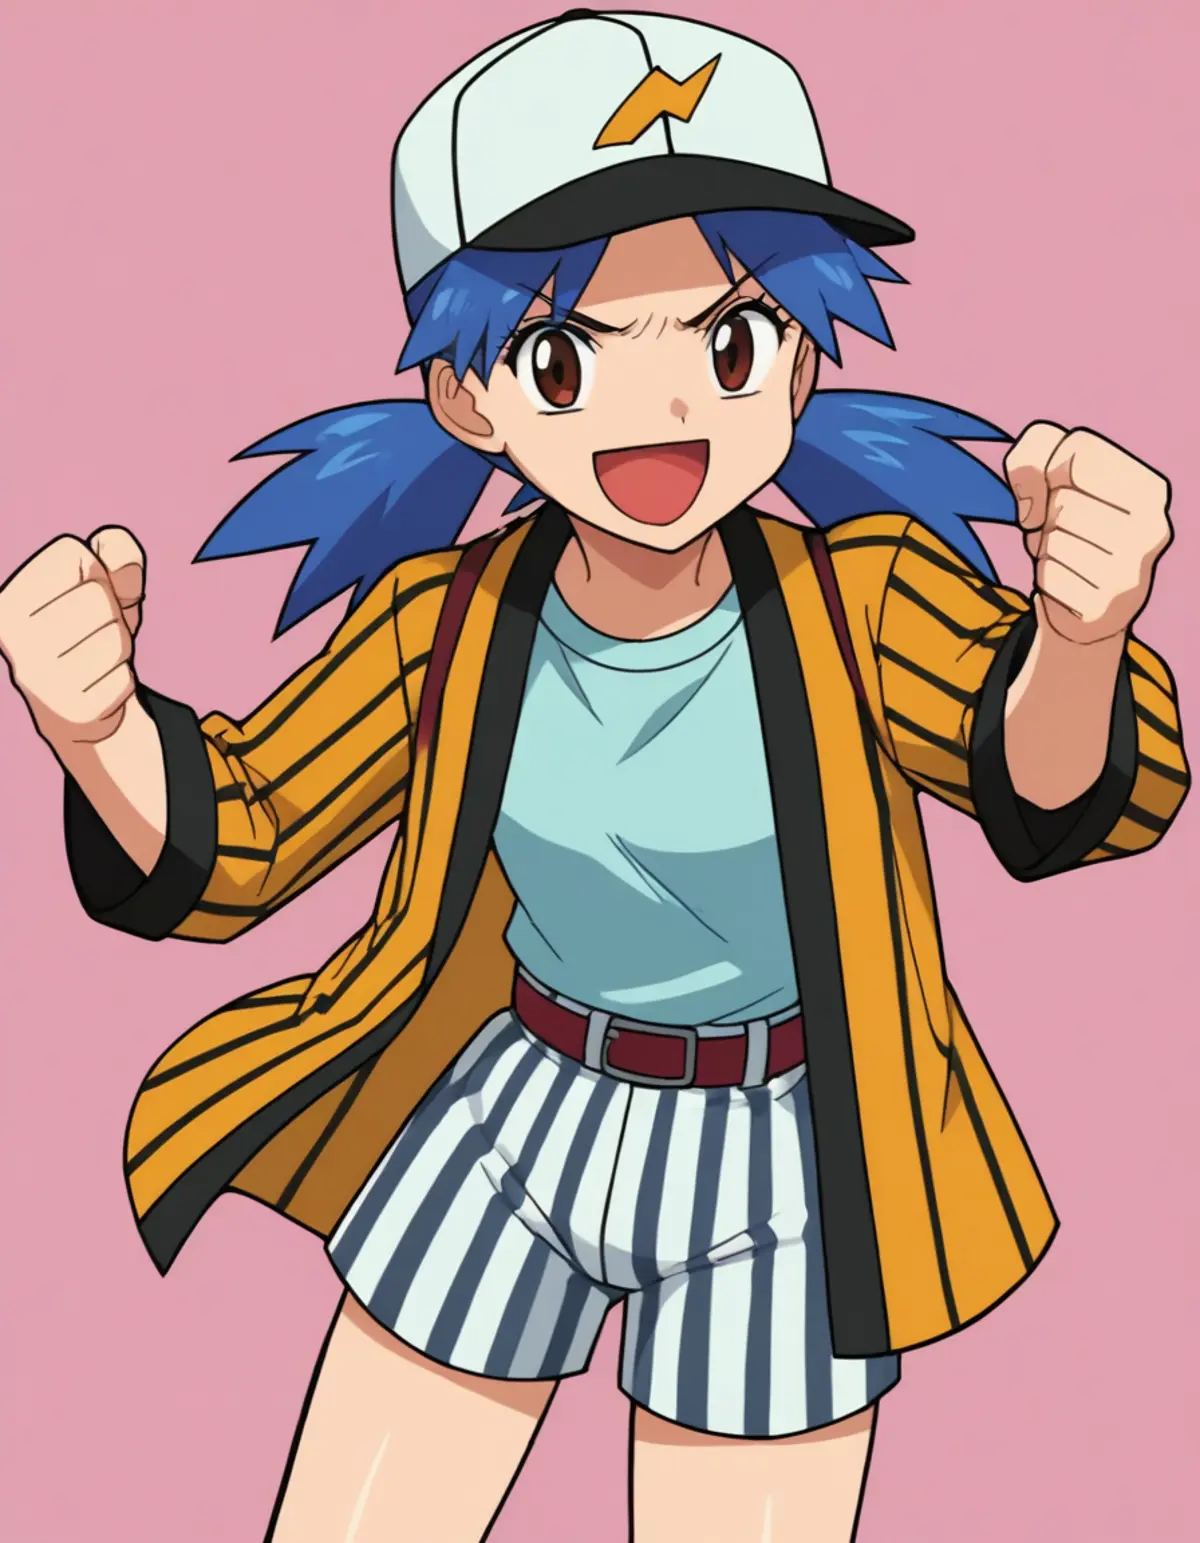 A girl with blue hair striking an enthusiastic pose is dressed in an outfit consisting of a white cap with a yellow symbol, a yellow-striped jacket, a blue t-shirt, and striped shorts. 